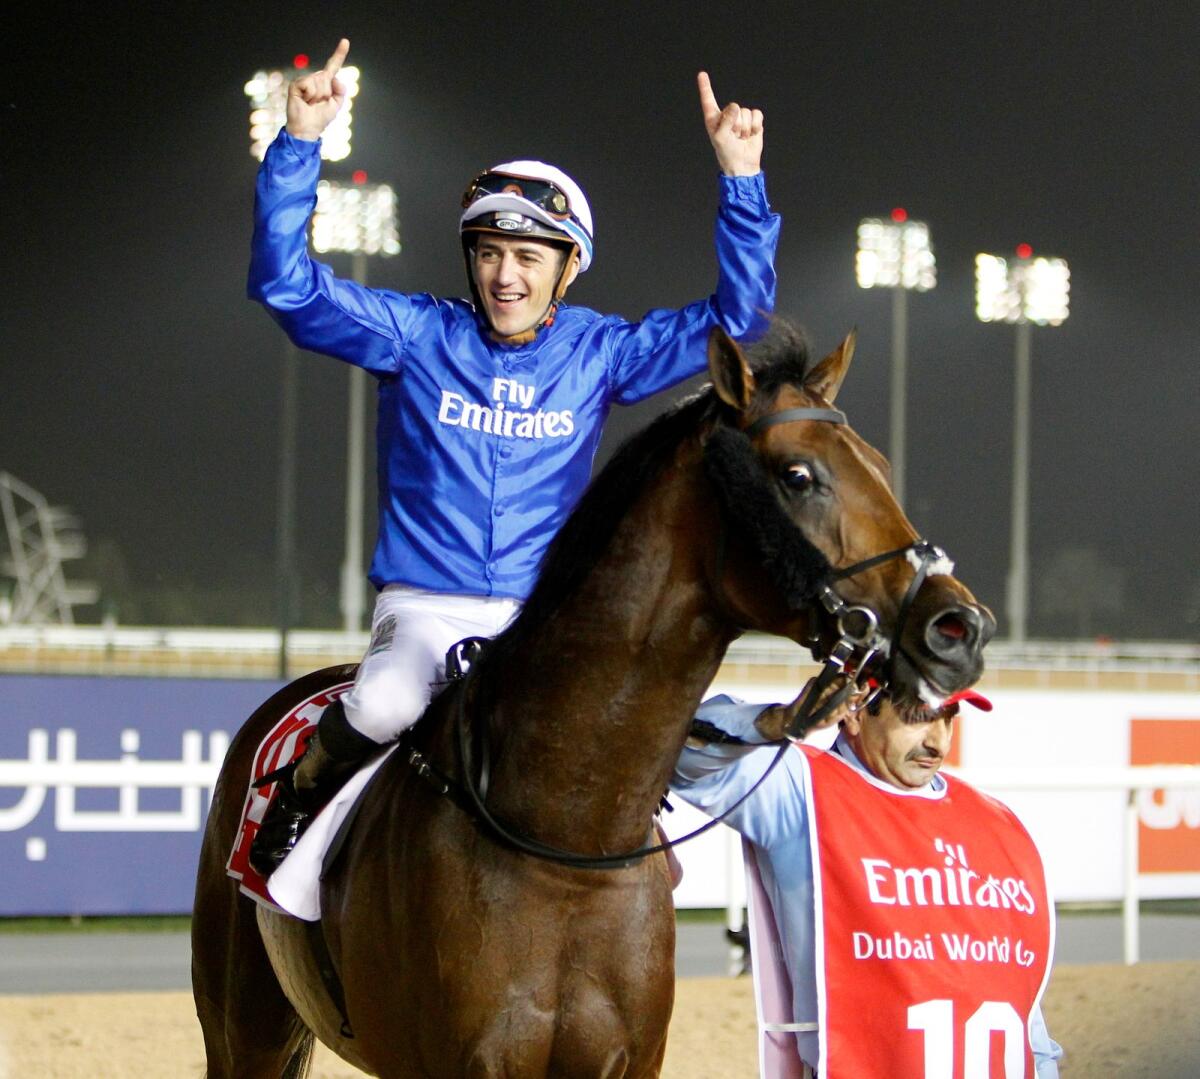 Thunder Snow ridden by Christophe Soumillon, the winner of the Dubai World Cup at Meydan Racecourse in 2018